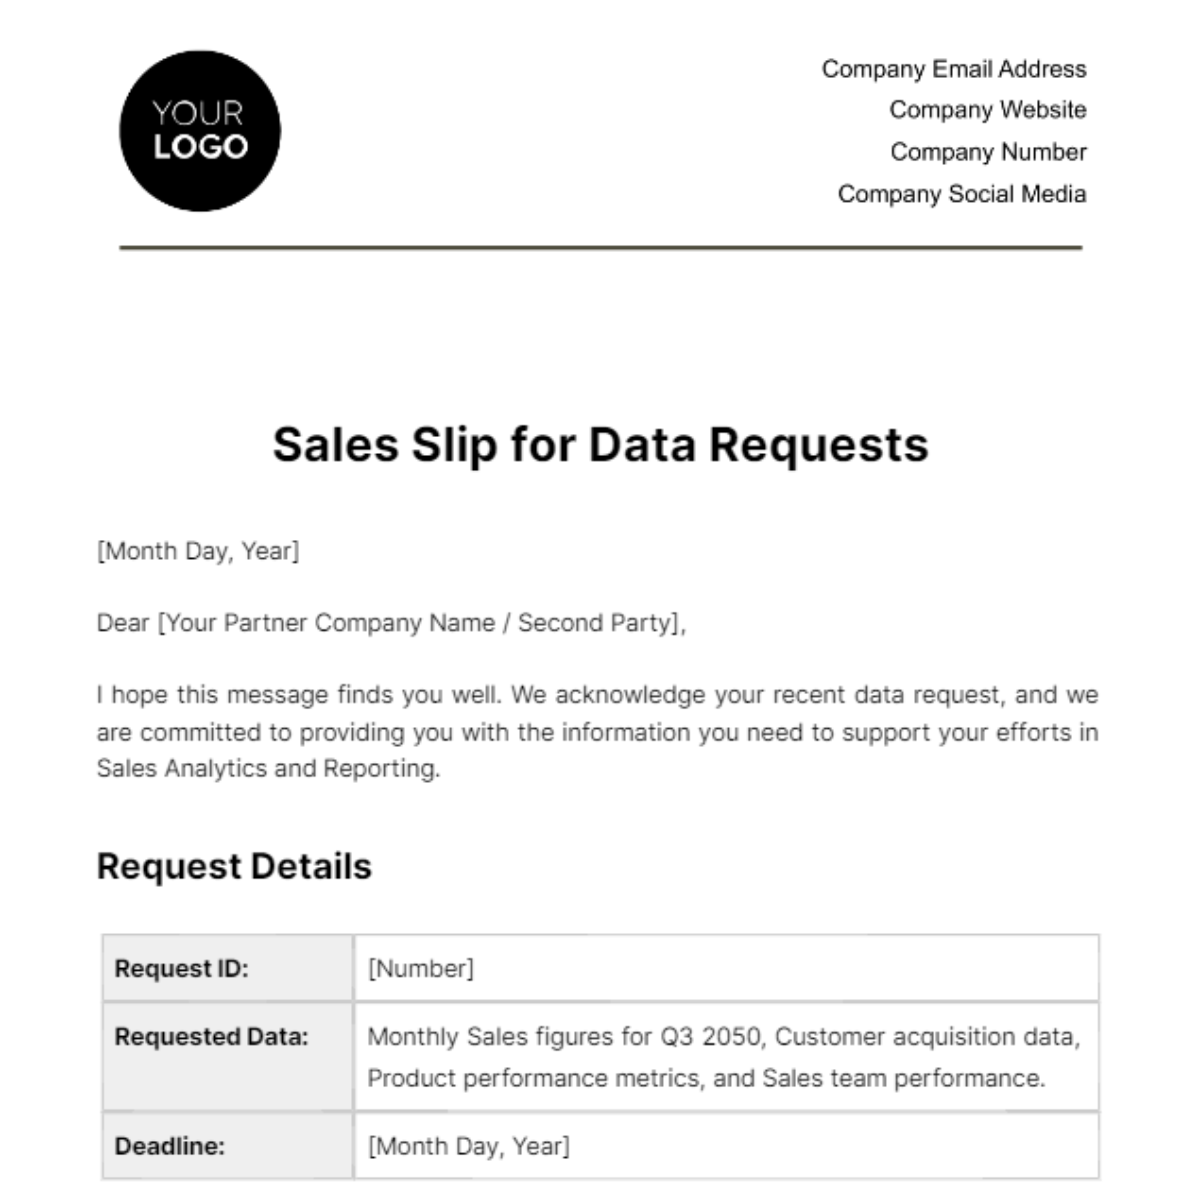 Free Sales Slip for Data Requests Template